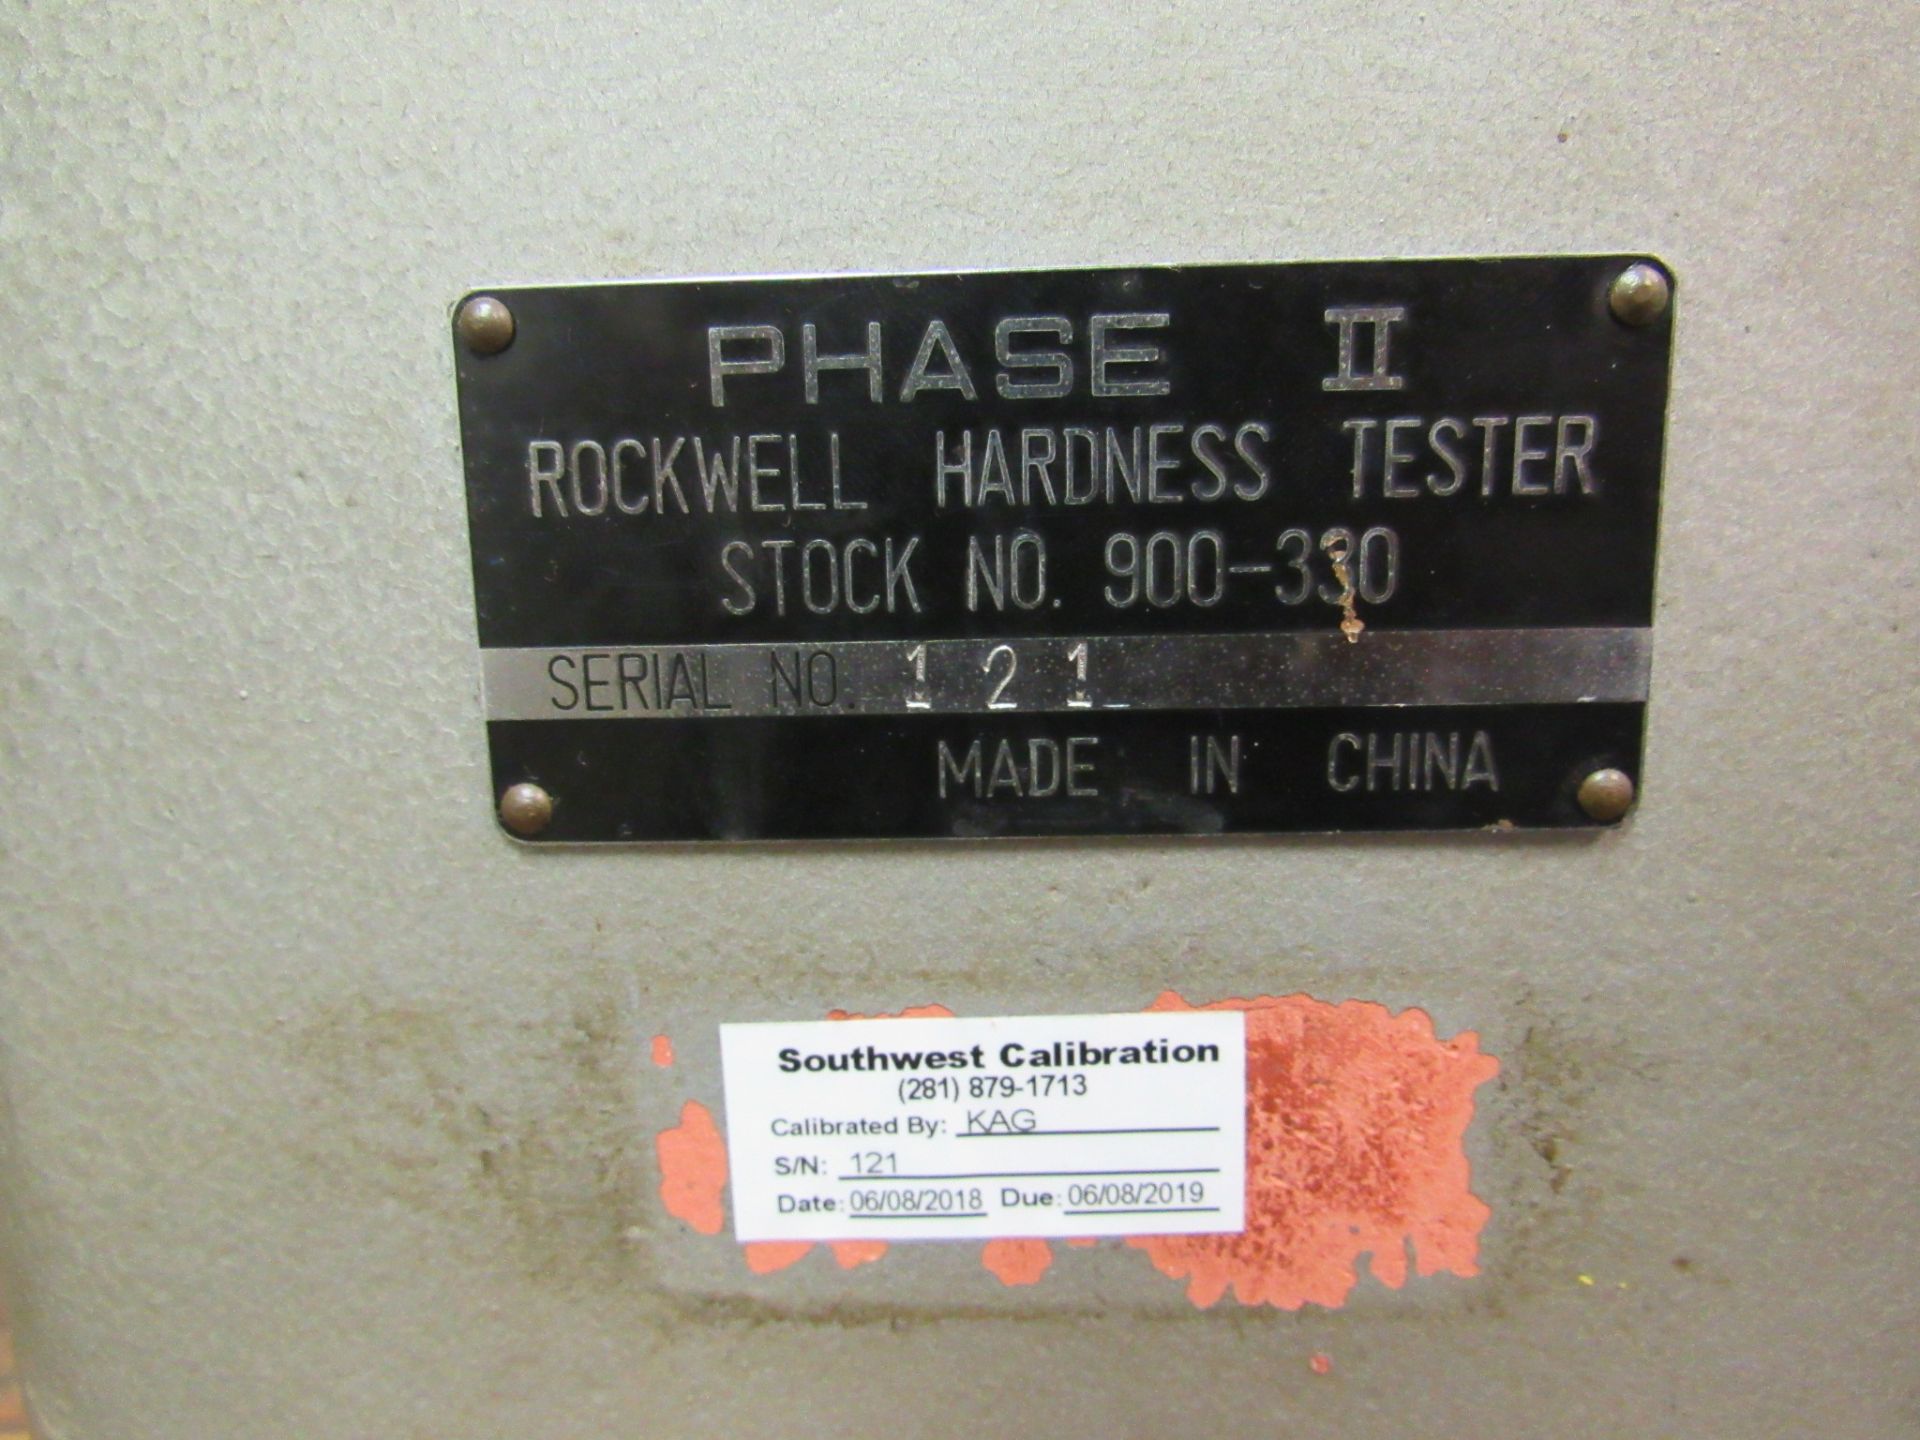 PHASE II ROCKWELL HARDNESS TESTER STOCK # 900-330 S/N 121 - Image 3 of 3